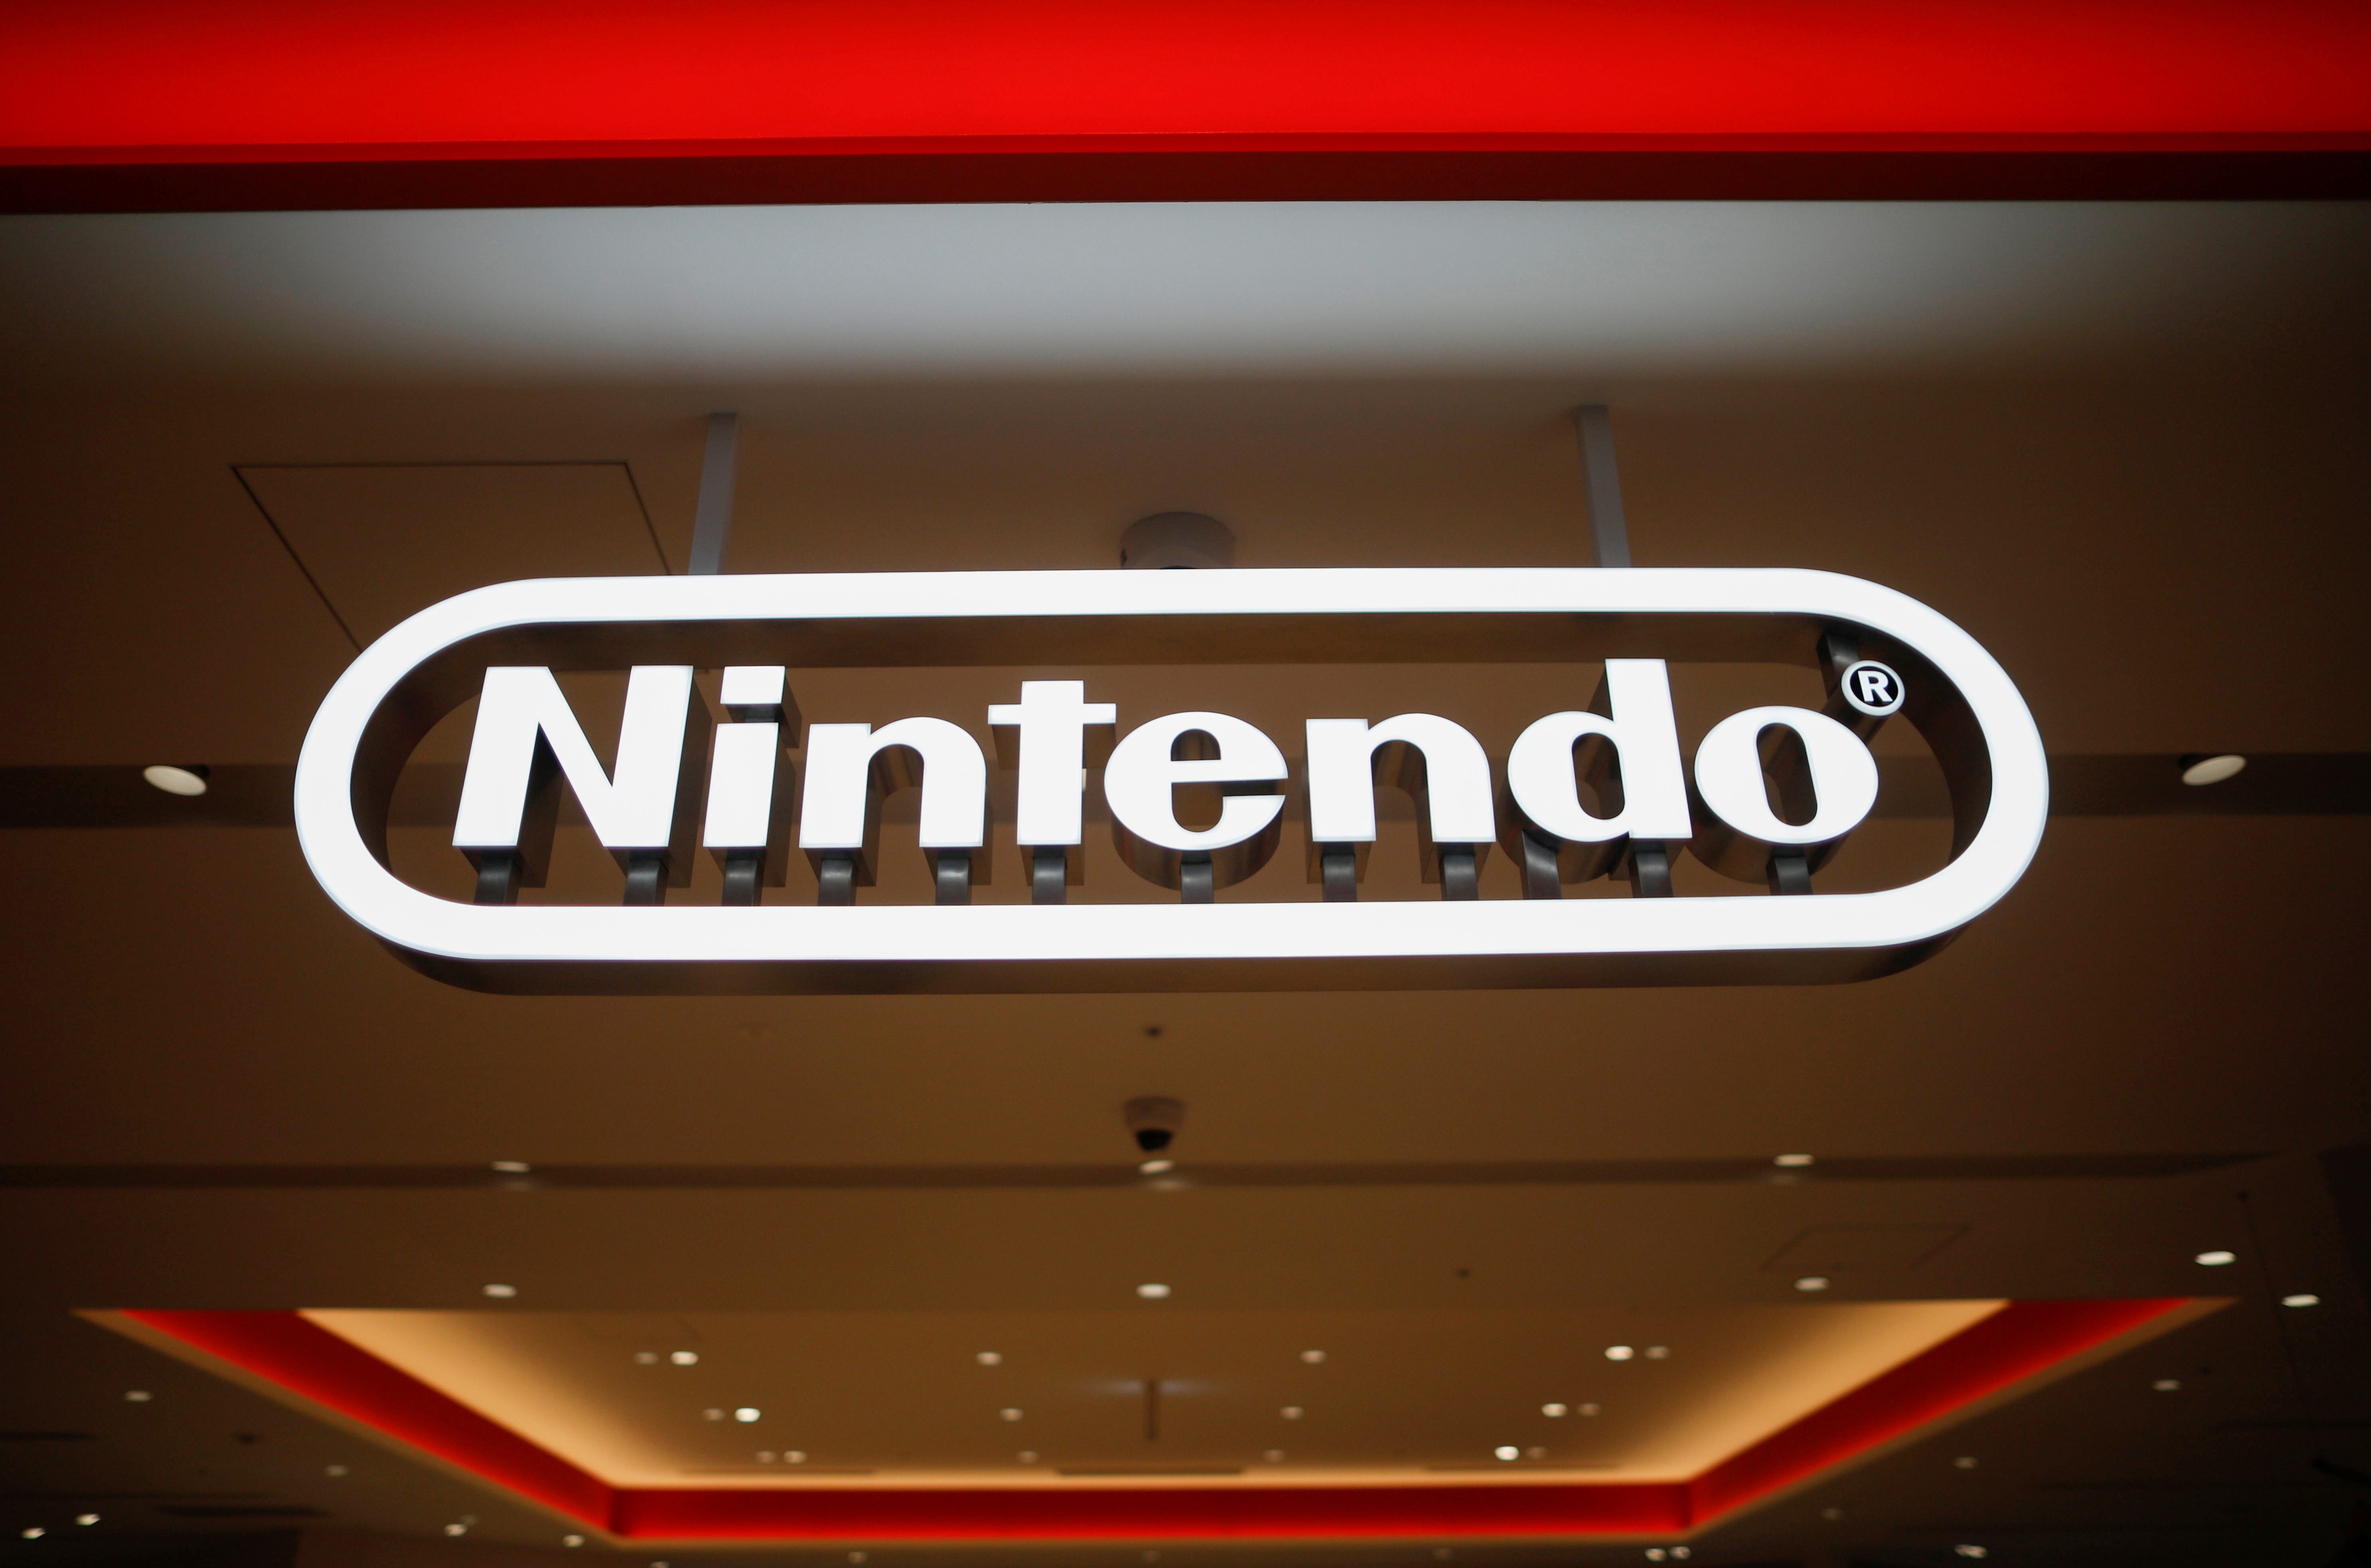 The logo of the Nintendo is displayed at Nintendo Tokyo, the first-ever Nintendo official store in Japan, during a press preview in Tokyo